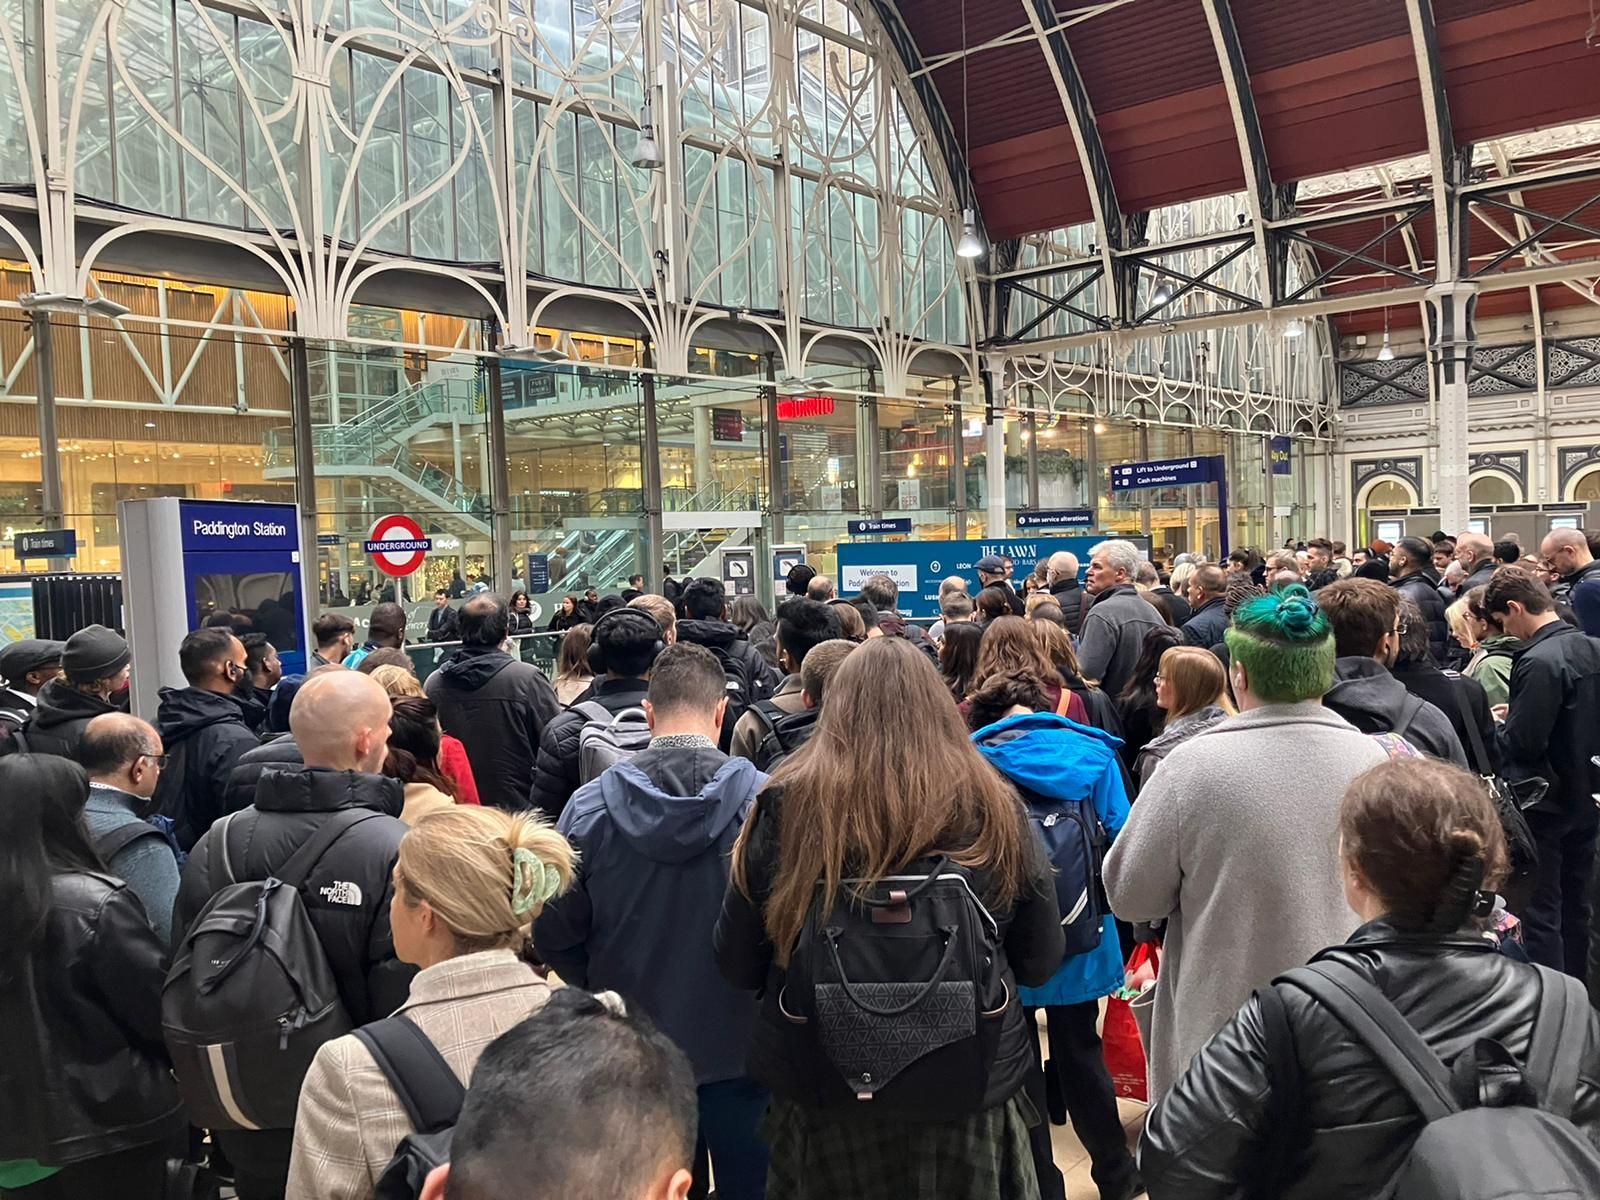 Commuters queuing at Paddington Station